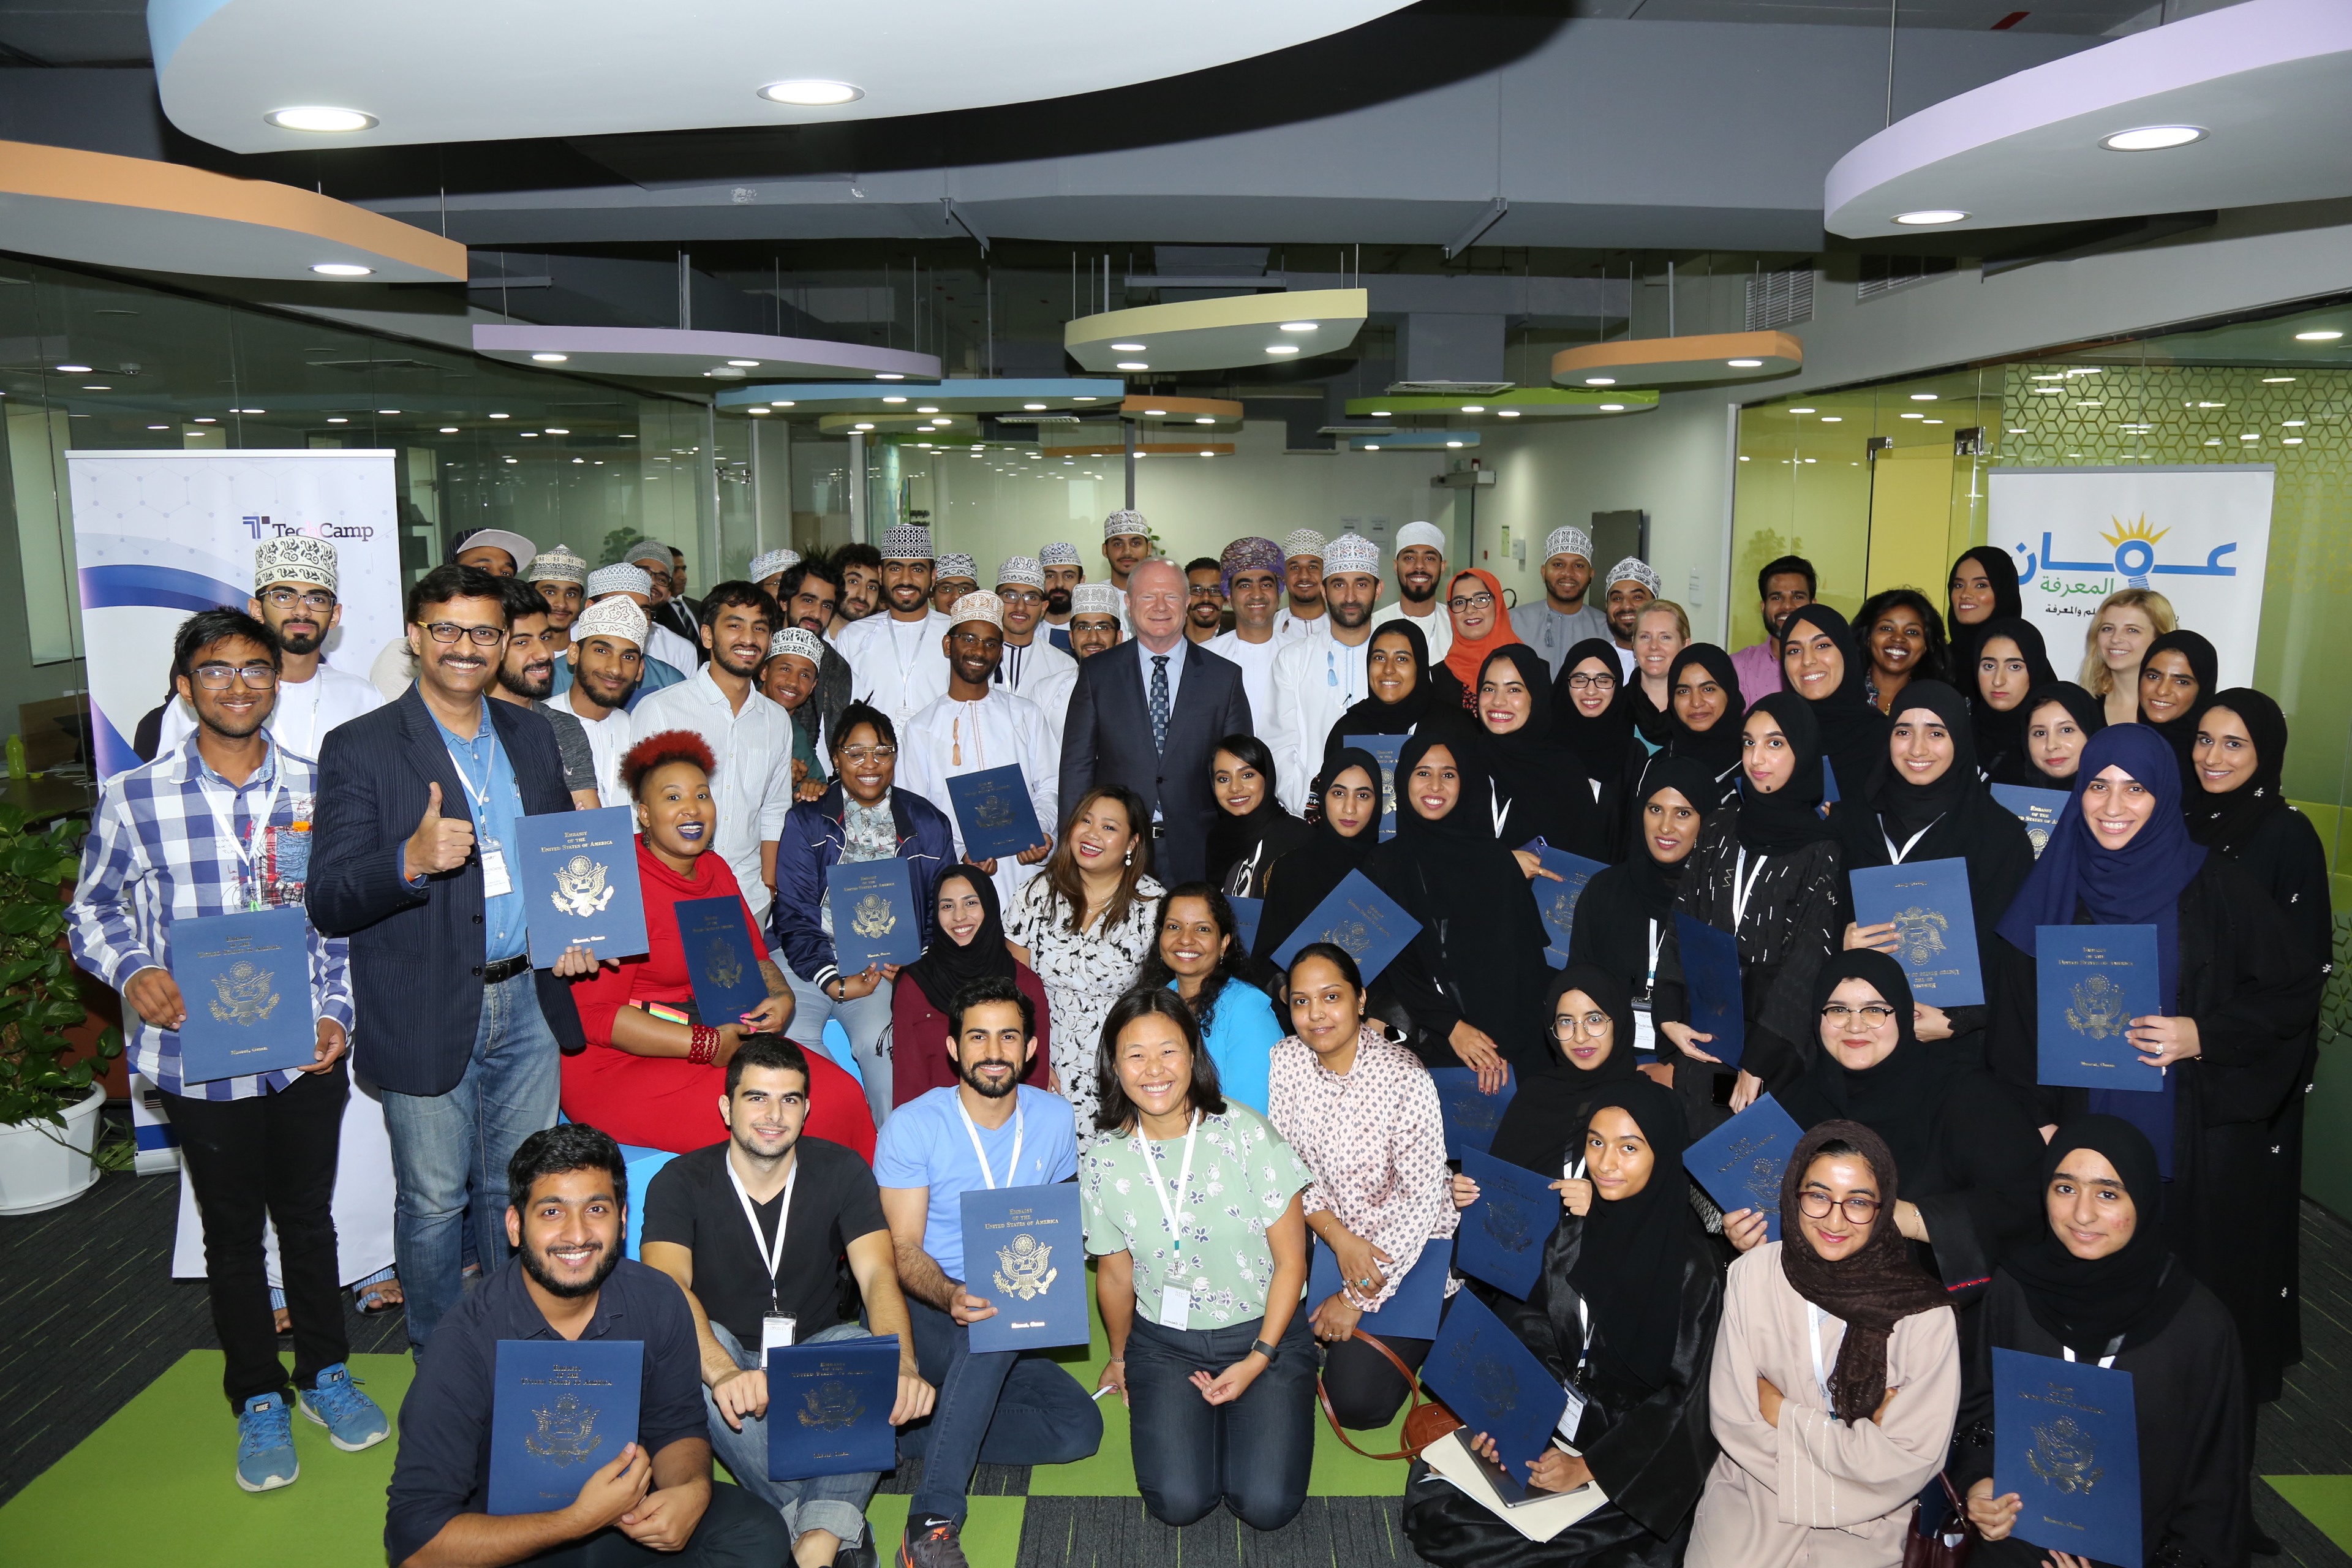 TechCamp trains 50 students from colleges and universities